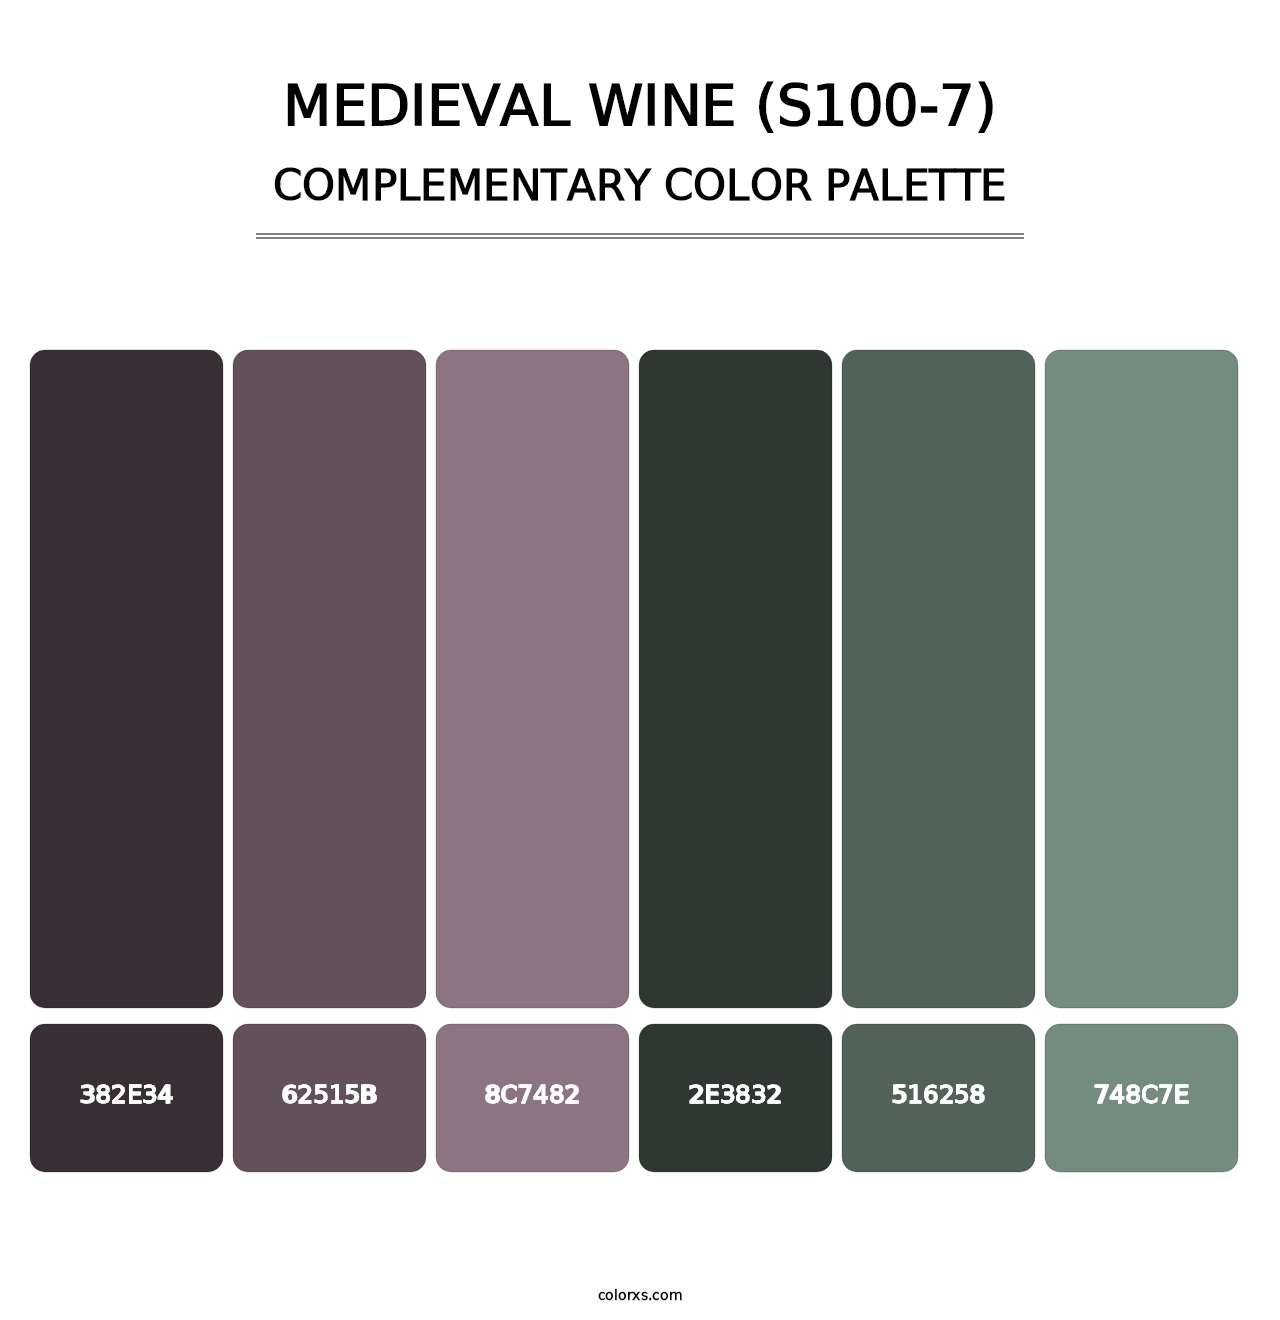 Medieval Wine (S100-7) - Complementary Color Palette